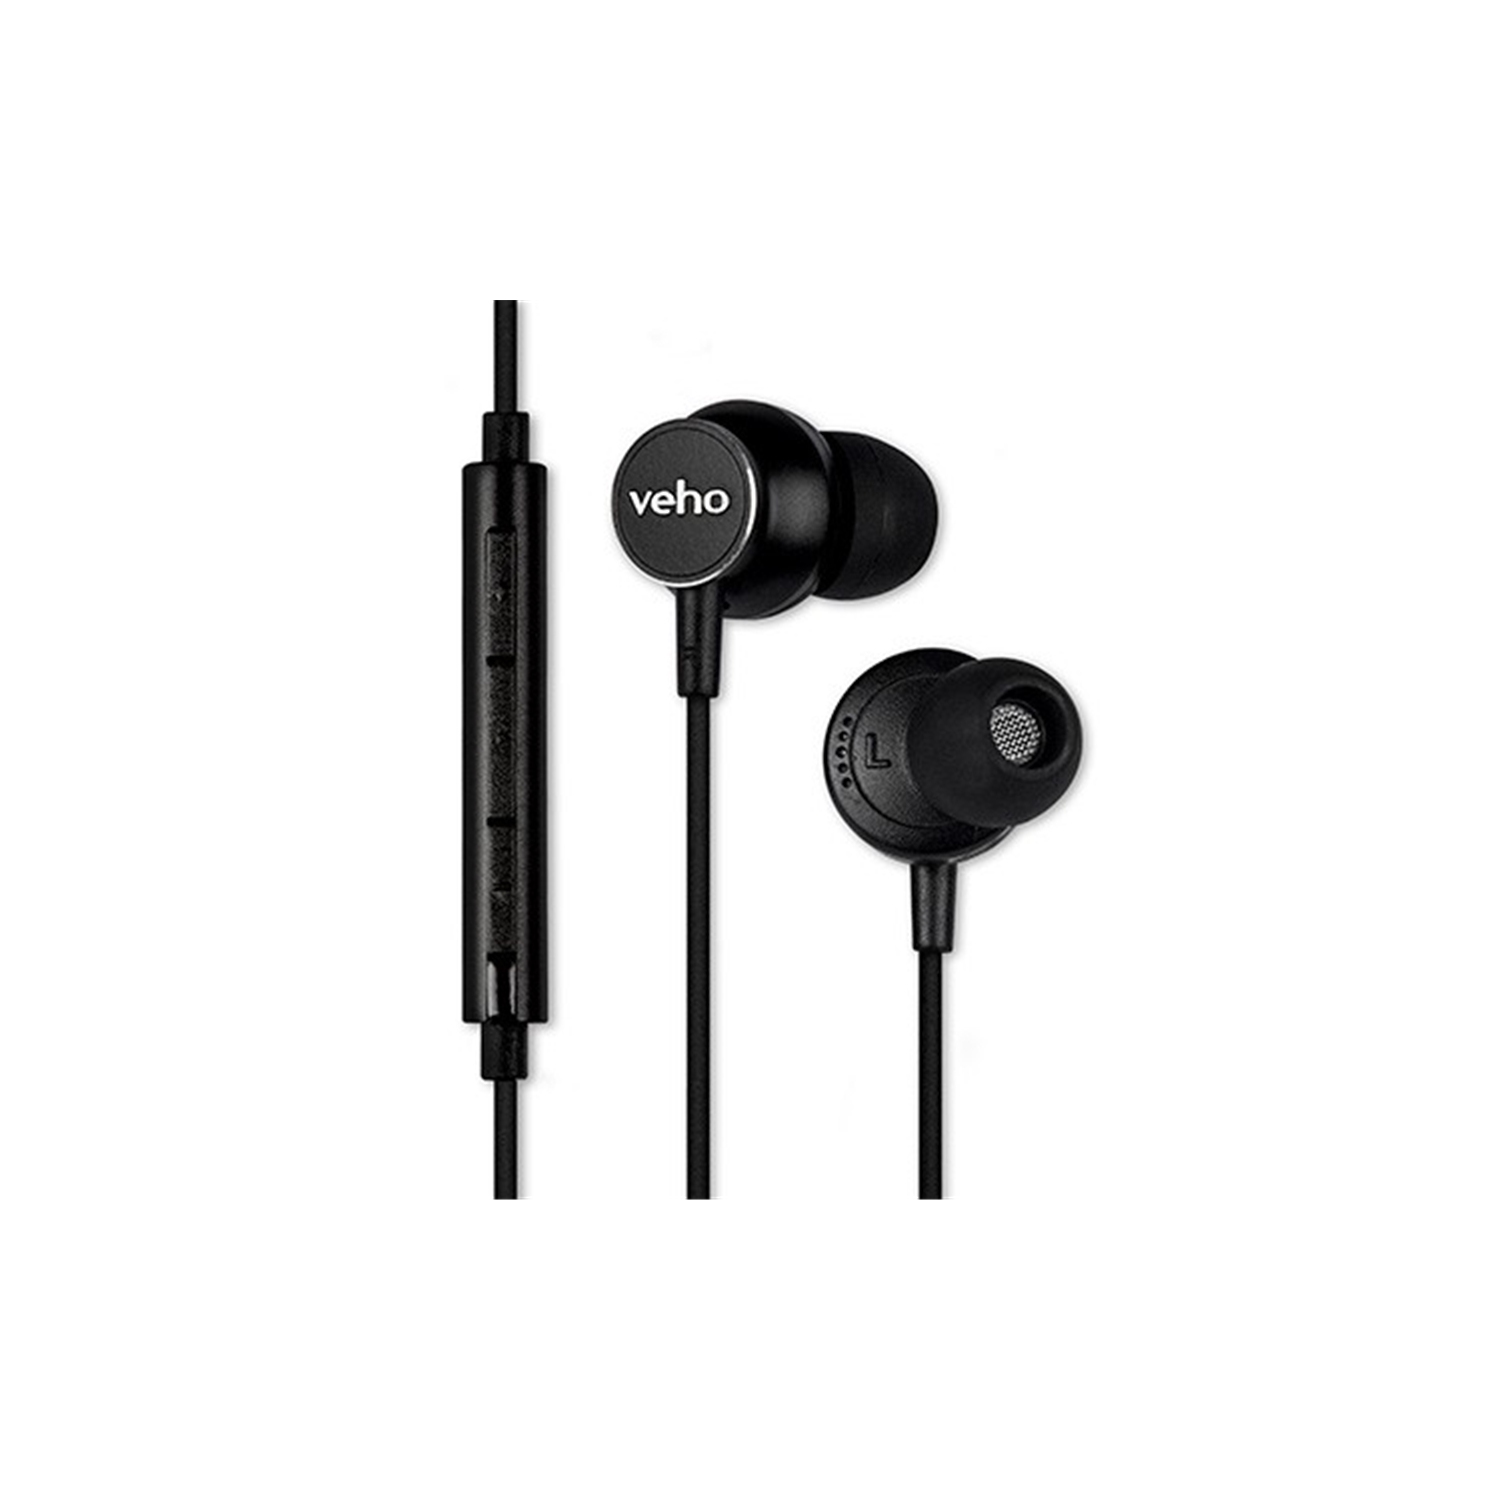 Veho Z3 - Wired In-Ear Headphones with Microphone and Remote Control, Black